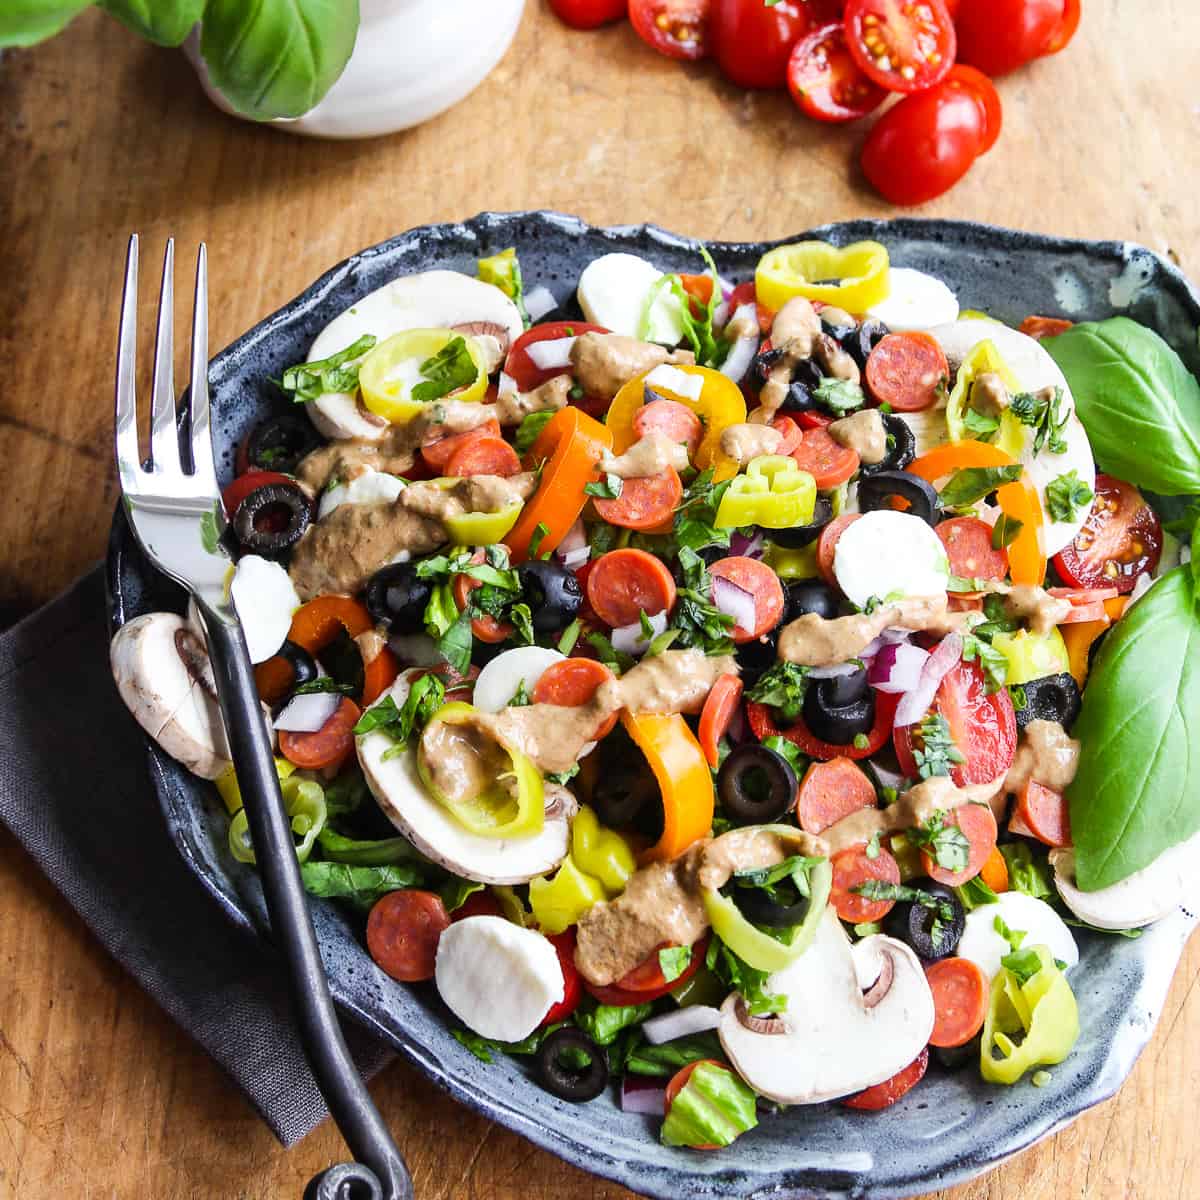 A plate full of pizza salad topped with mini pepperoni, mushrooms, mozzarella balls, pepperoncinis, and black olives with a artistic black fork on the edge of the plate.